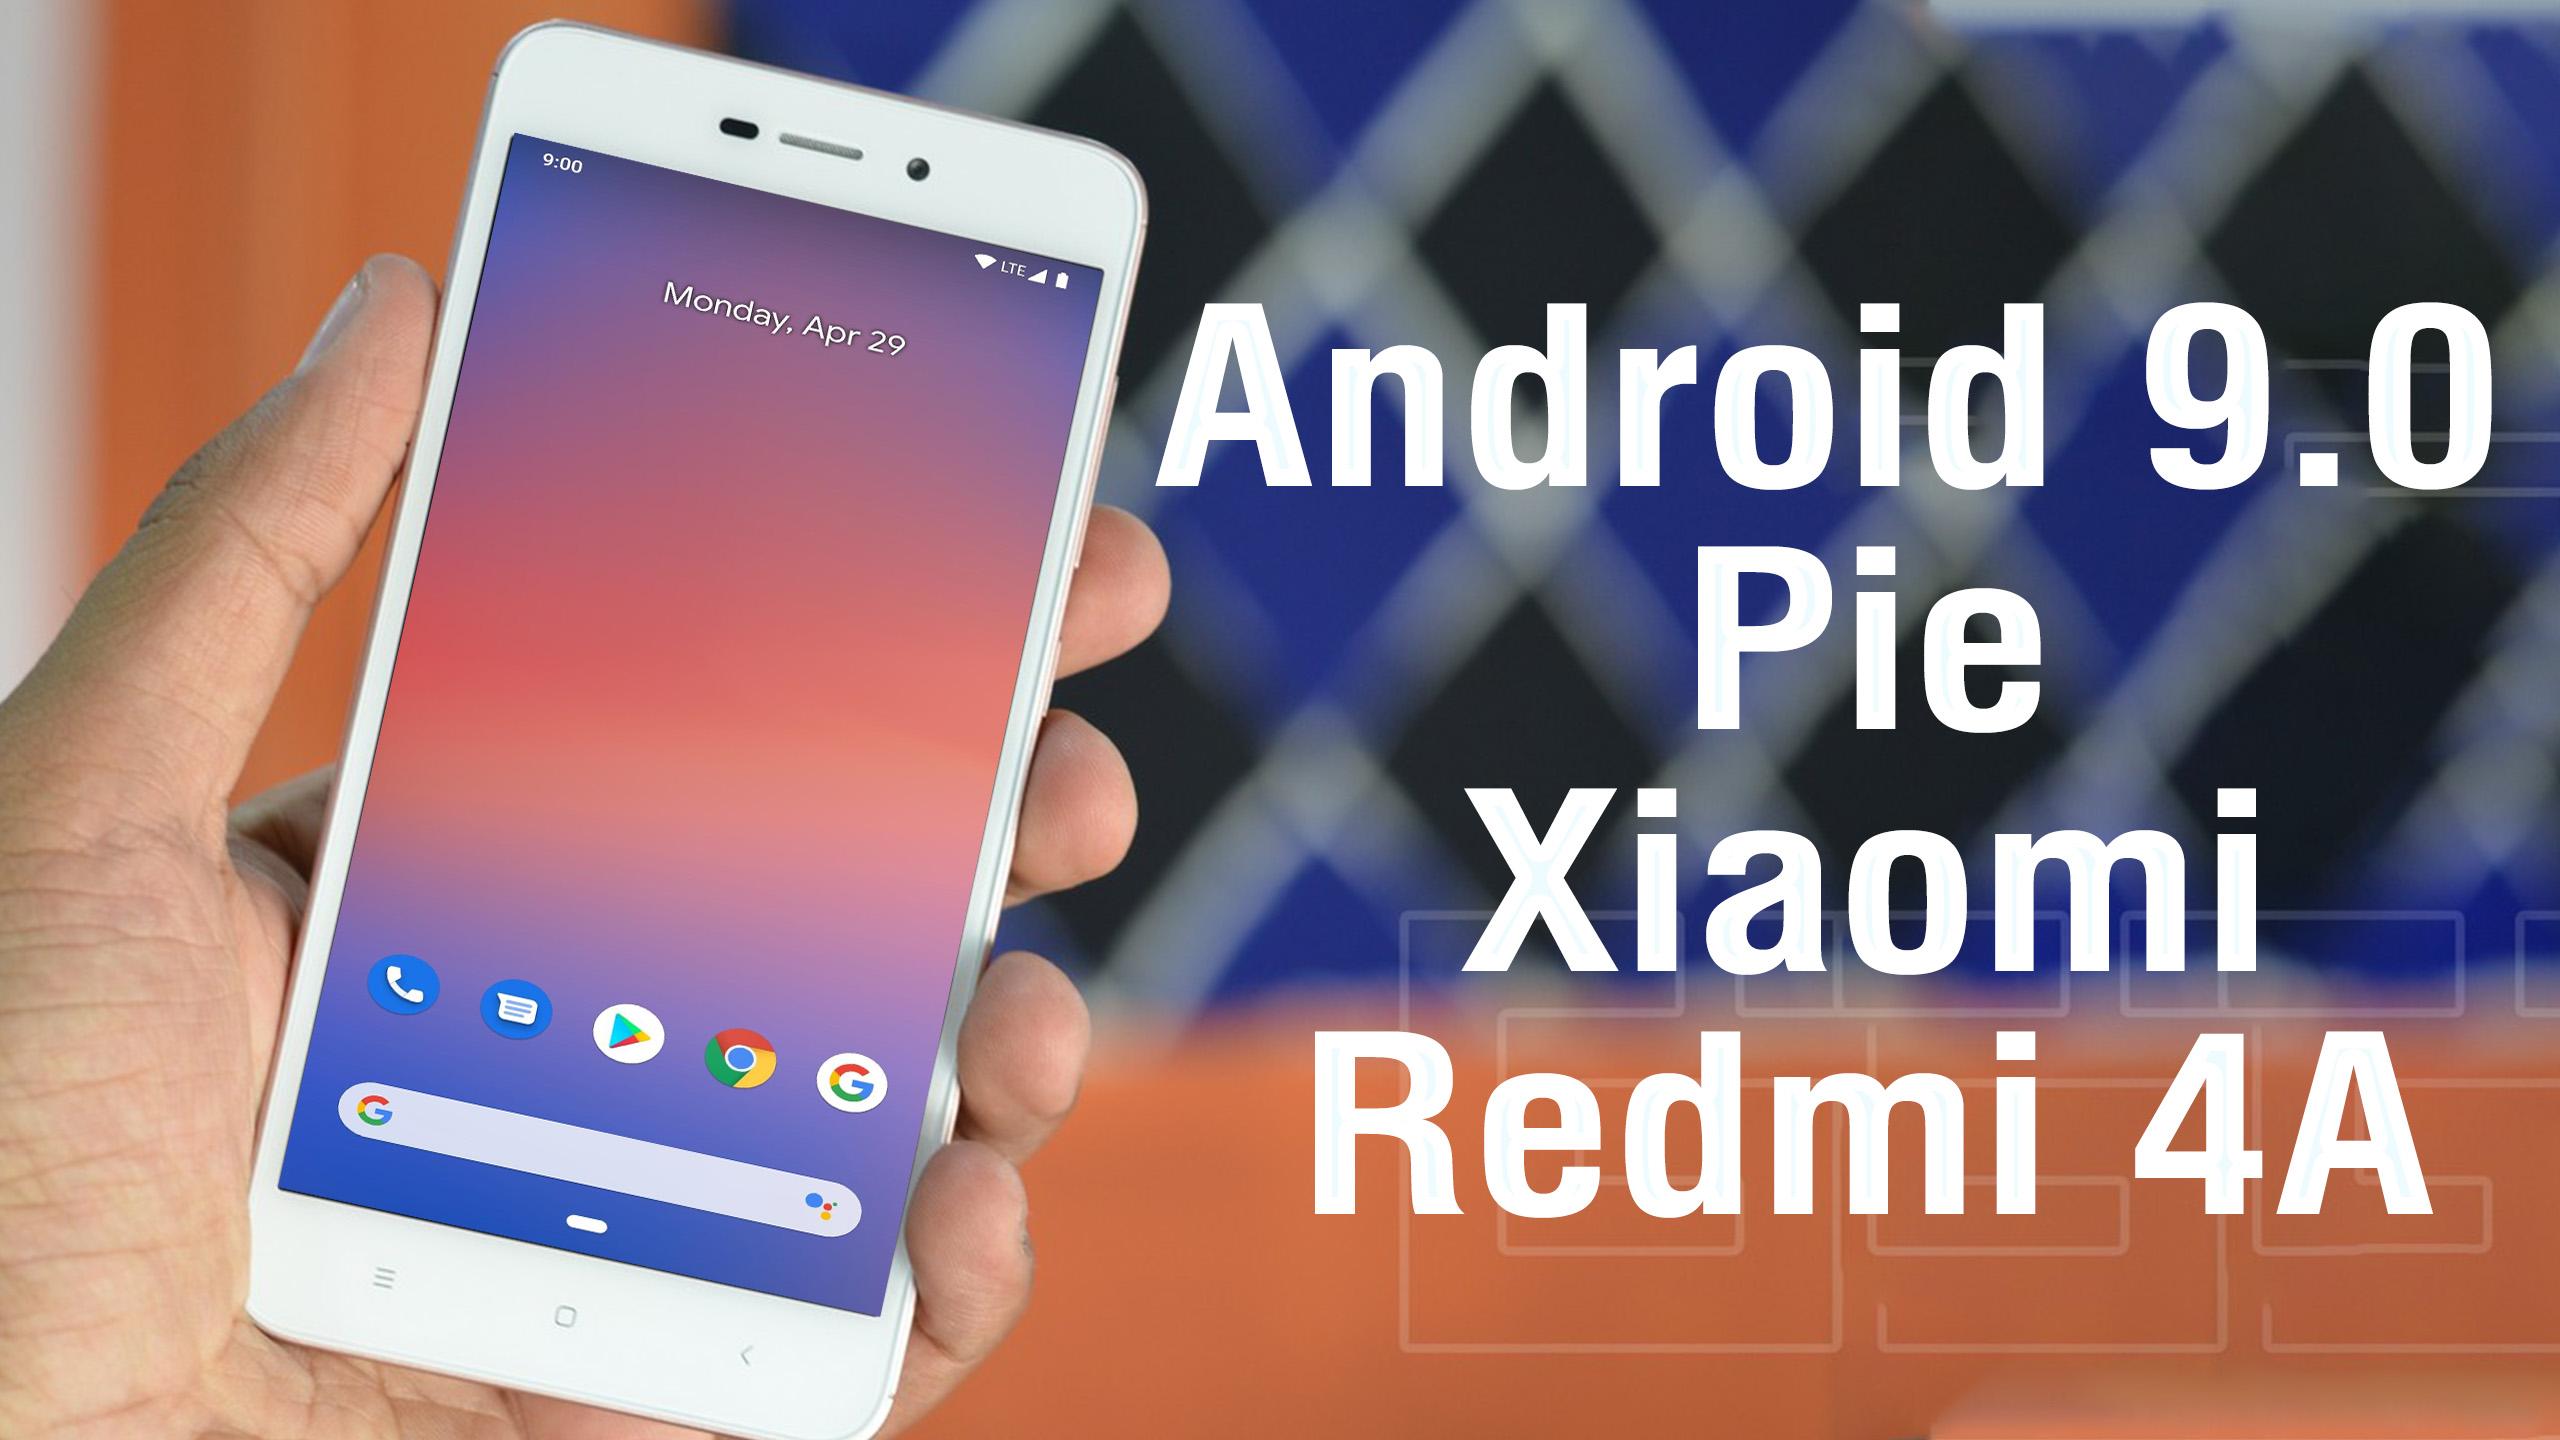 Install Android 9 0 Pie On Xiaomi Redmi 4a Pixel Experience Rom How To Guide The Upgrade Guide